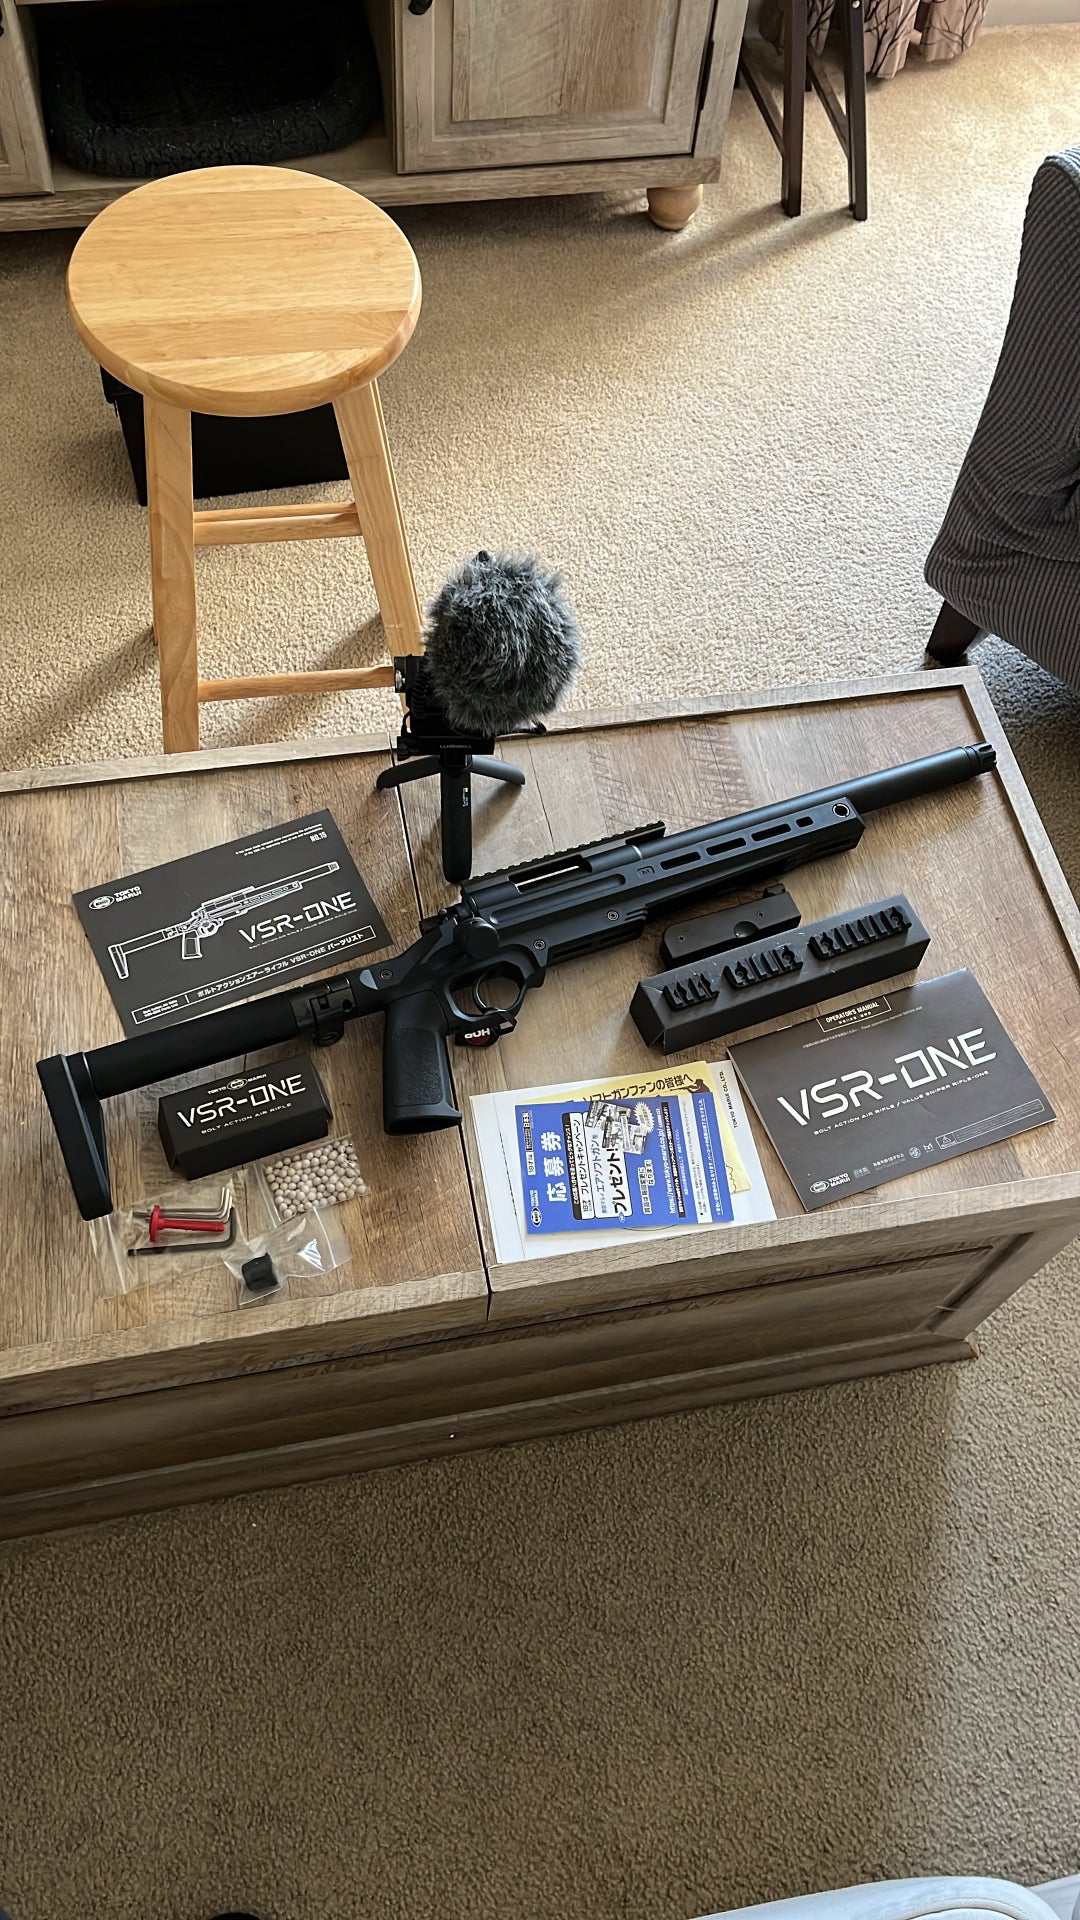 The Vsr-ONE | Airsoft Sniper Forum